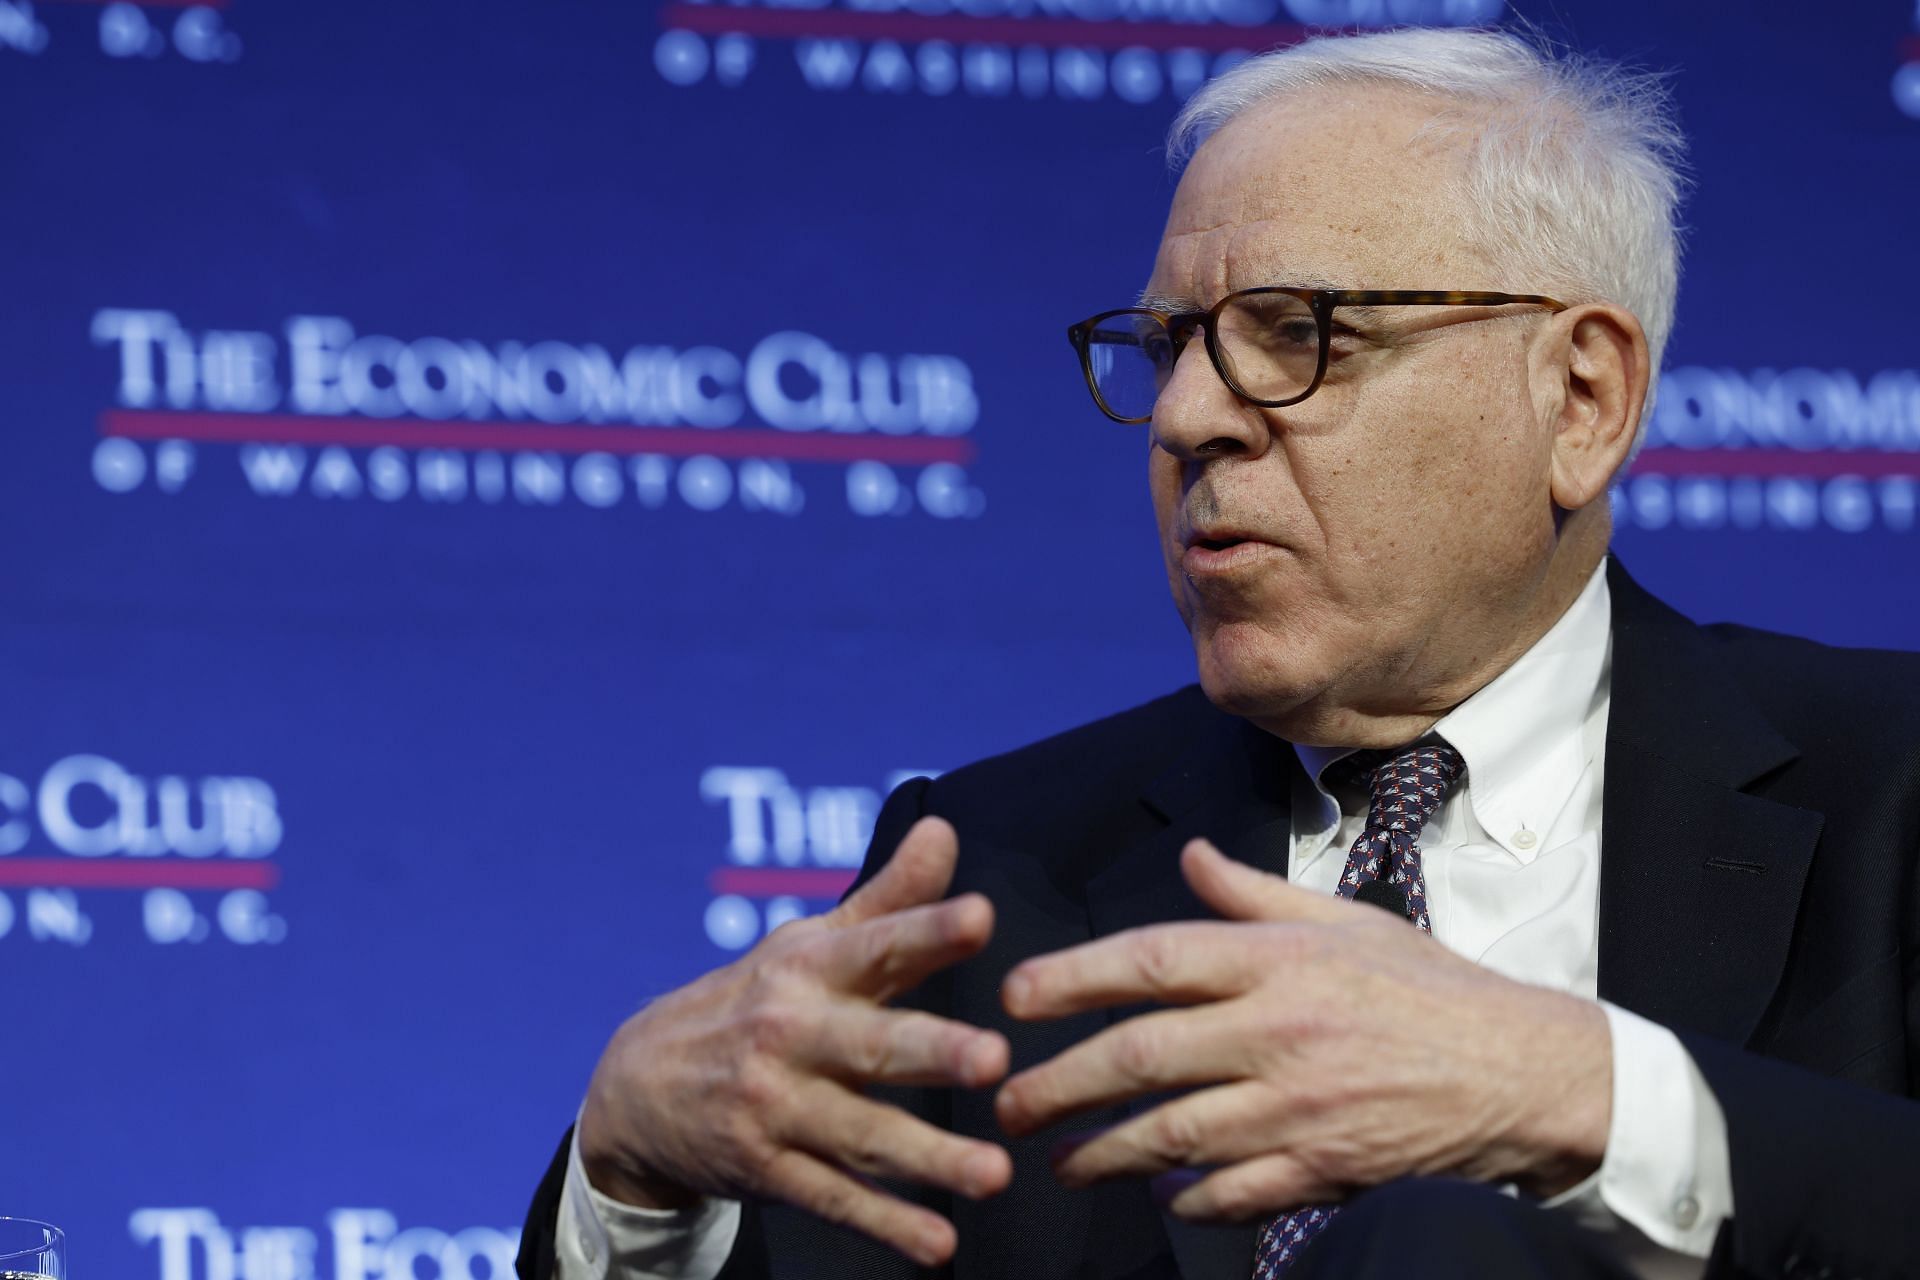 In 1987, Rubenstein, along with his partners, founded the Carlyle Group, initially raising $5 million to kickstart the venture